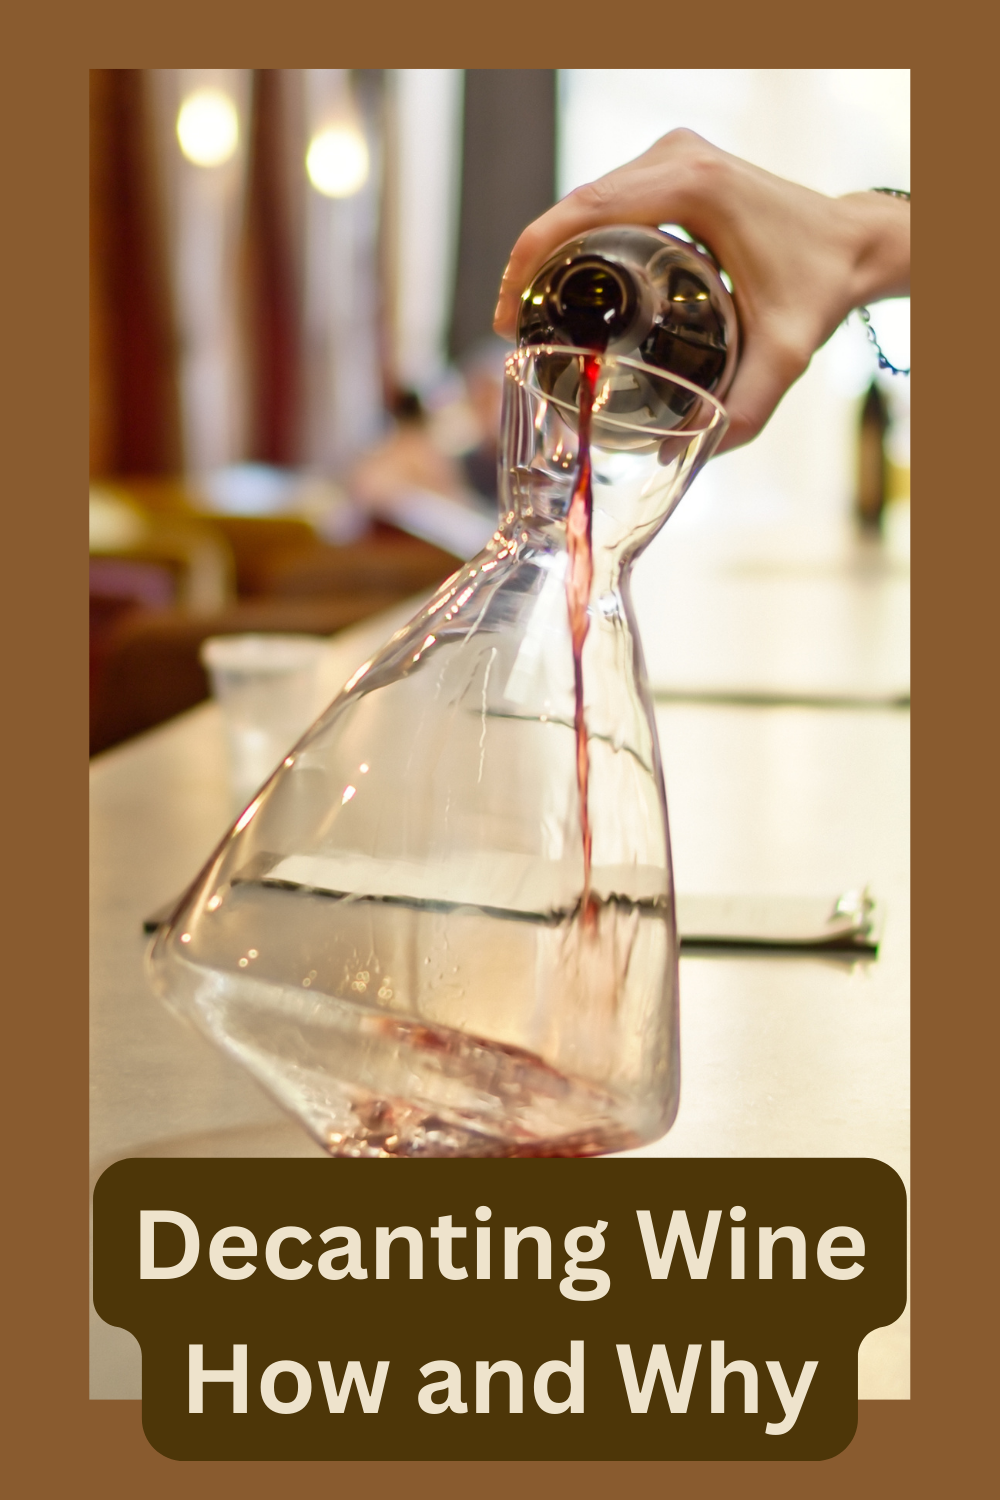 Decanting Wine How to Decant Wine and Why to Decant Wine